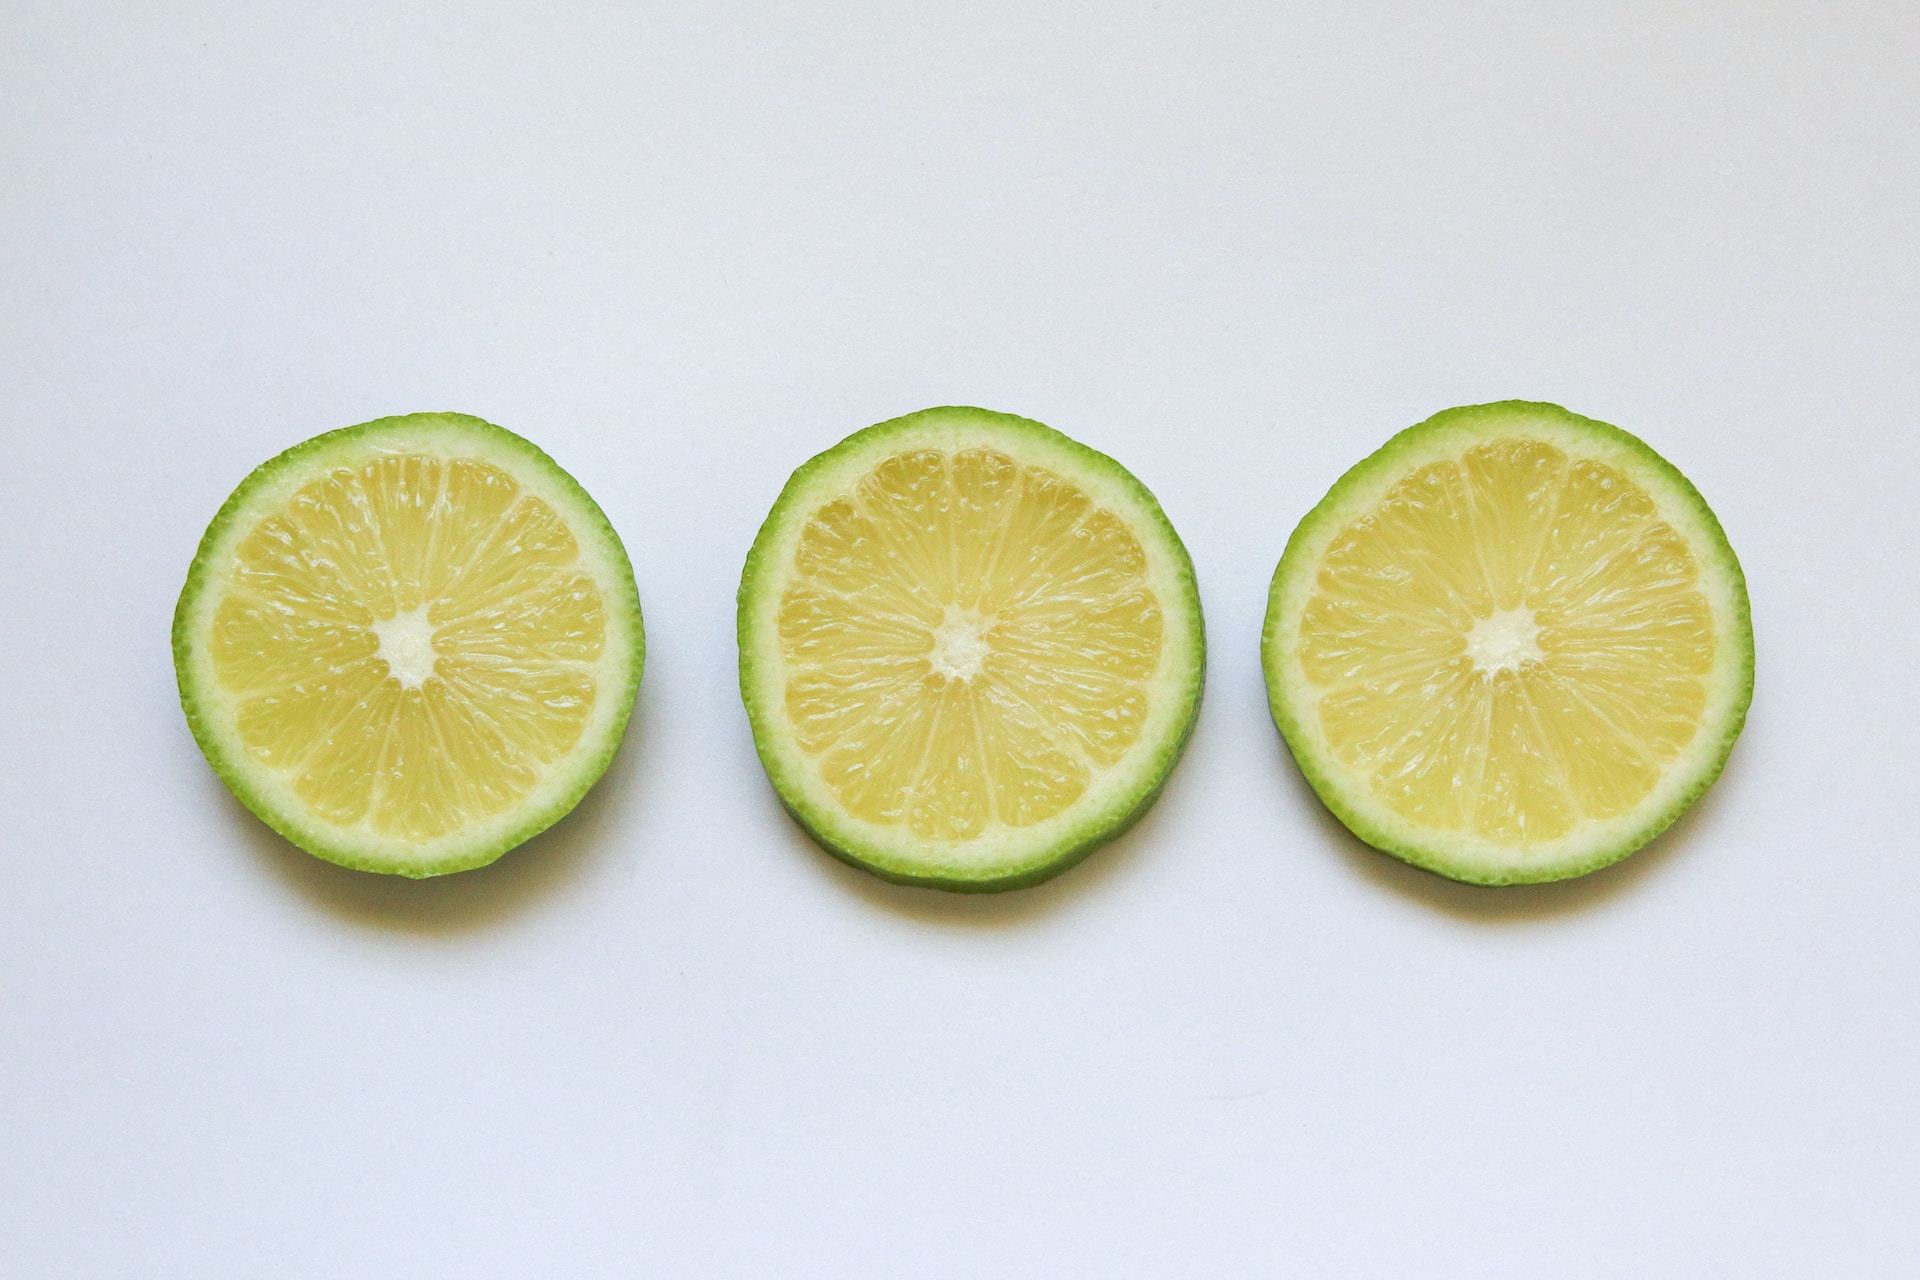 20-facts-about-limes